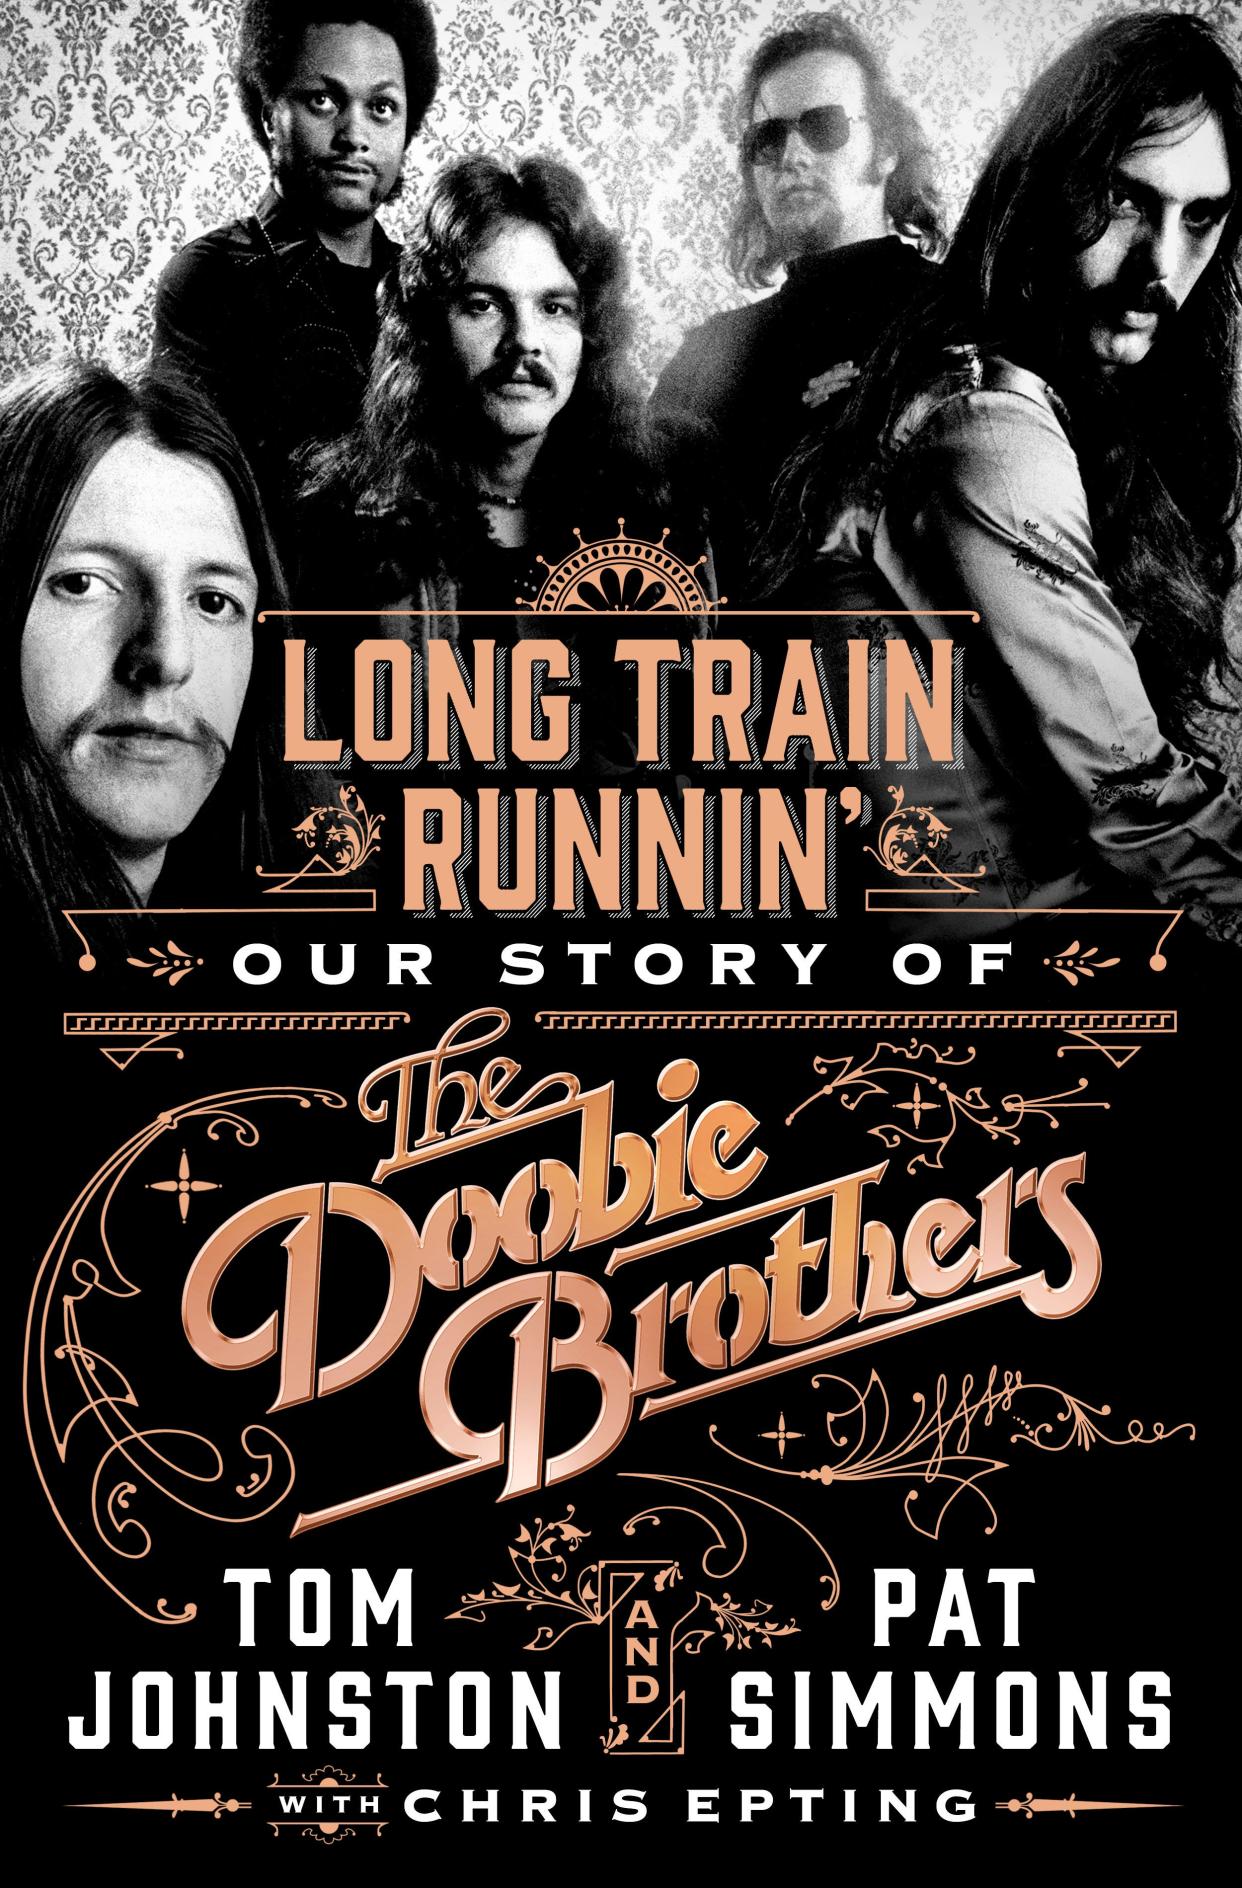 The history of rockers The Doobie Brothers is shared by band members in "Long Train Runnin’: Our Story of The Doobie Brothers."